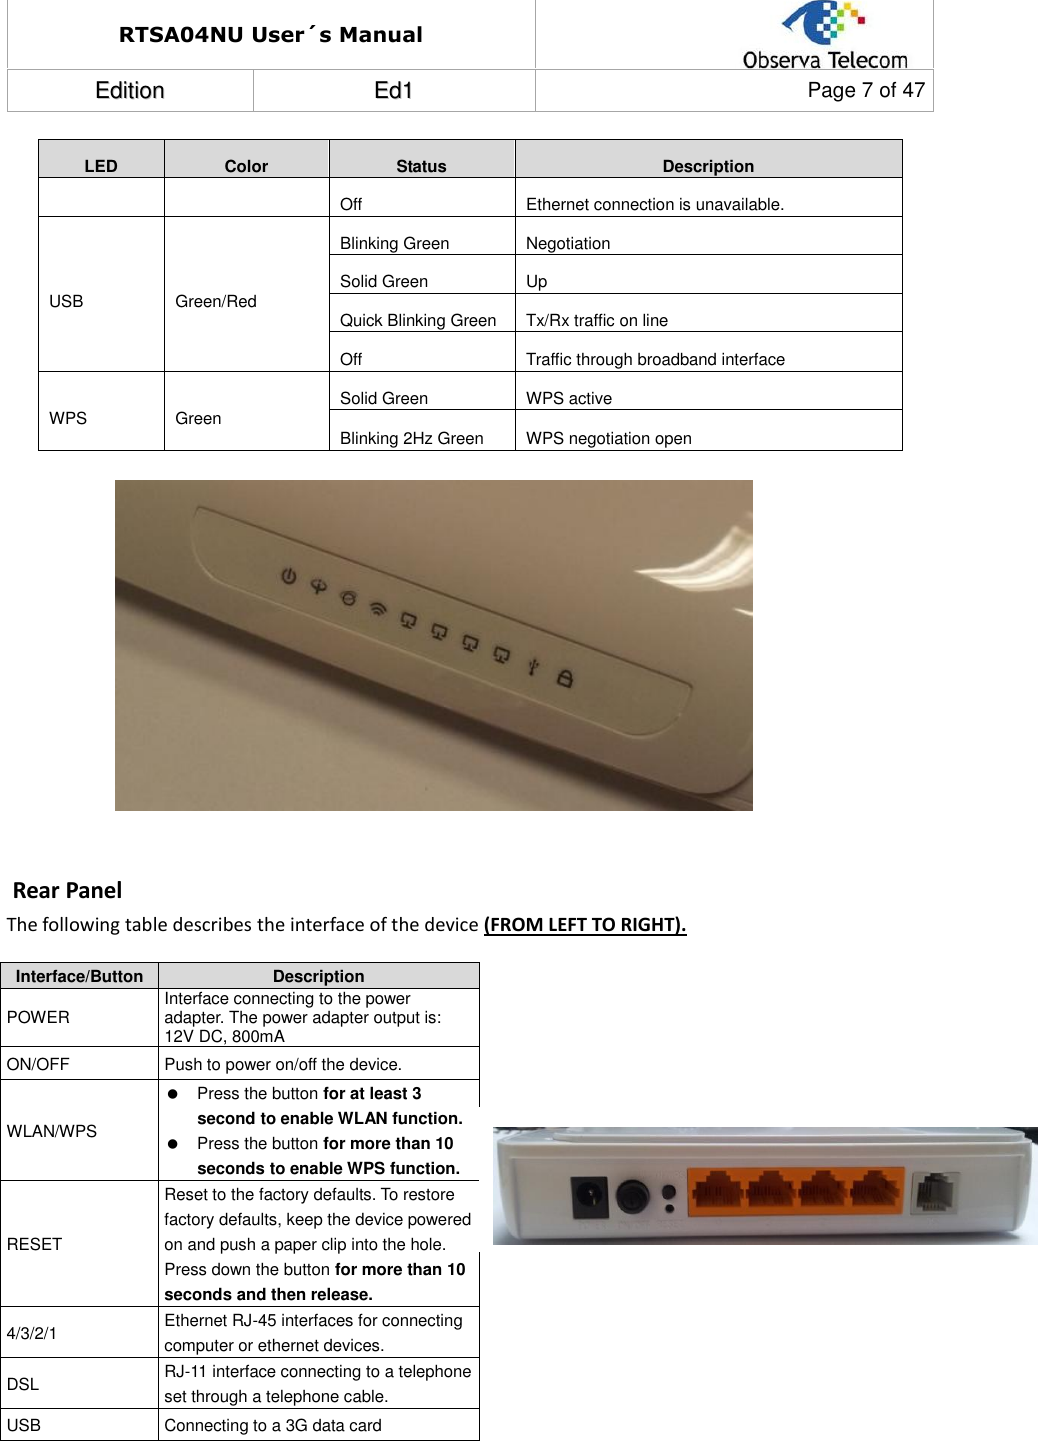 RTSA04NU User´s Manual  EEddiittiioonn  EEdd11  Page 7 of 47  LED  Color  Status  Description Off  Ethernet connection is unavailable. USB  Green/Red Blinking Green  Negotiation Solid Green  Up Quick Blinking Green  Tx/Rx traffic on line Off  Traffic through broadband interface WPS  Green  Solid Green  WPS active Blinking 2Hz Green  WPS negotiation open                 Rear Panel The following table describes the interface of the device (FROM LEFT TO RIGHT).  Interface/Button  Description POWER  Interface connecting to the power adapter. The power adapter output is: 12V DC, 800mA ON/OFF  Push to power on/off the device. WLAN/WPS   Press the button for at least 3 second to enable WLAN function.   Press the button for more than 10 seconds to enable WPS function. RESET Reset to the factory defaults. To restore factory defaults, keep the device powered on and push a paper clip into the hole. Press down the button for more than 10 seconds and then release. 4/3/2/1  Ethernet RJ-45 interfaces for connecting computer or ethernet devices. DSL  RJ-11 interface connecting to a telephone set through a telephone cable. USB  Connecting to a 3G data card       